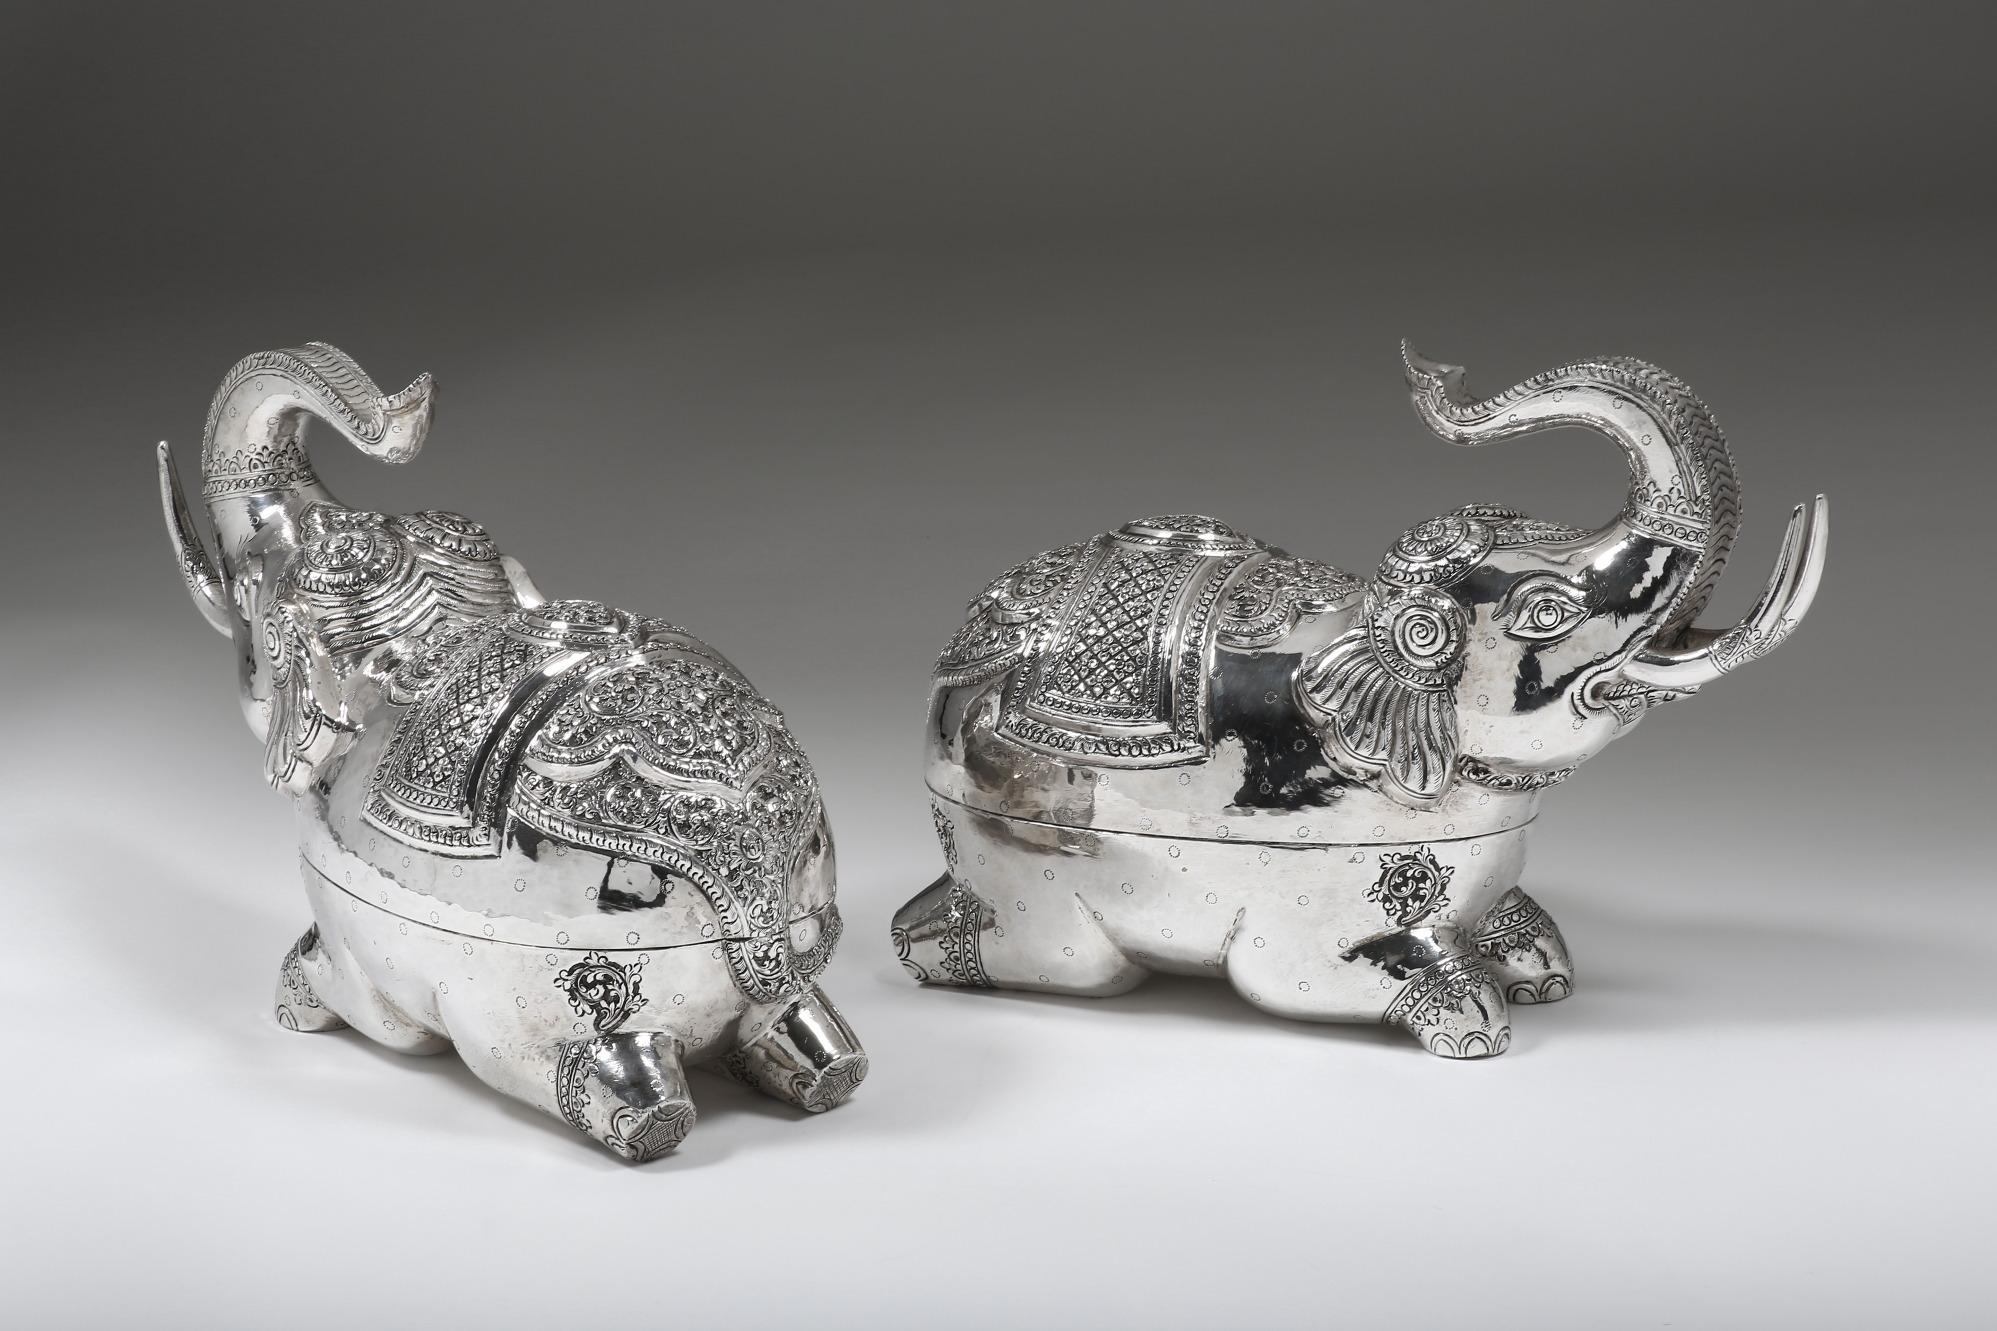 Hong Kong Hand-Worked Contemporary Solid Silver Elephant Box For Sale